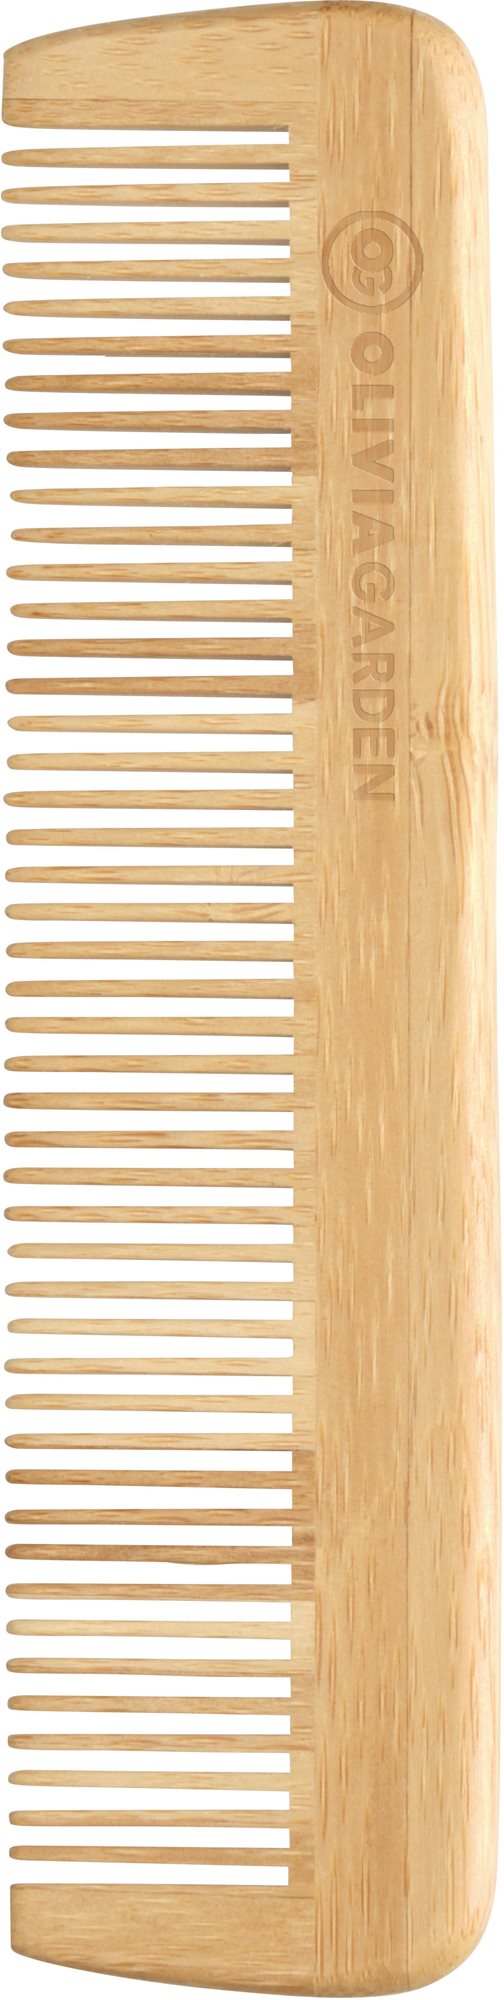 OLIVIA GARDEN Bamboo Touch Comb 1